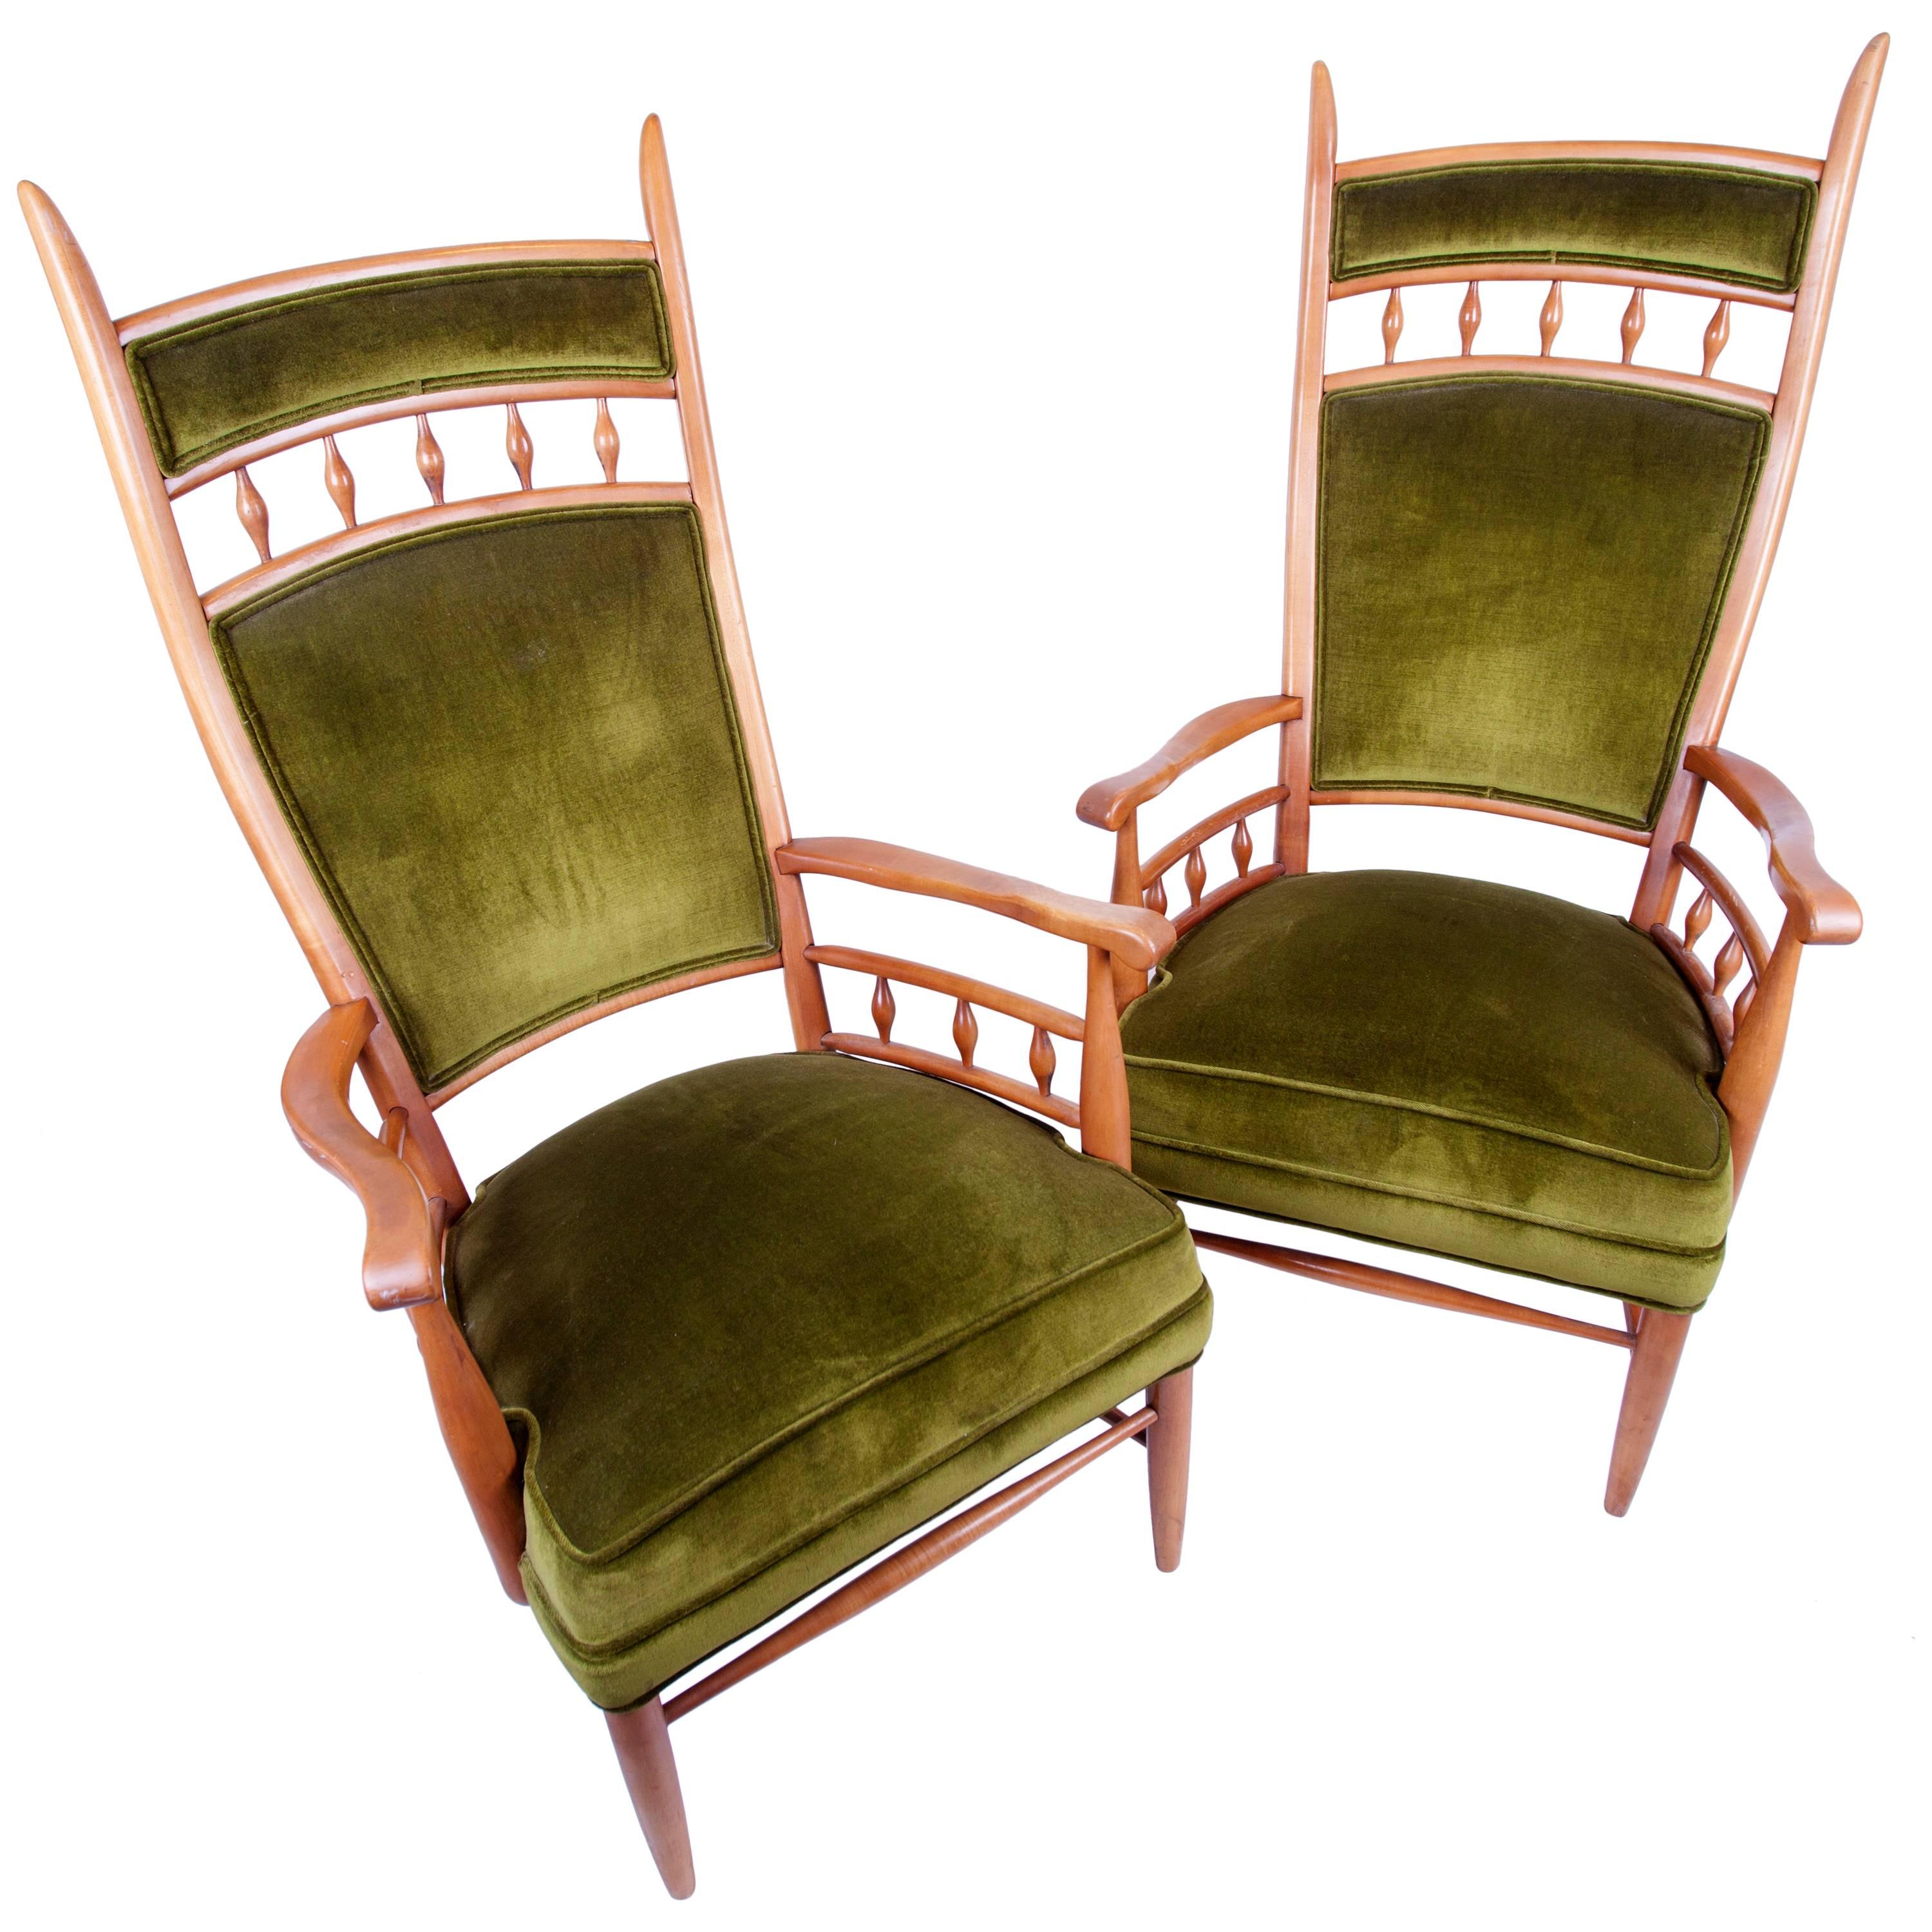 Pair of Tall Fruitwood Framed Armchairs by Maxwell Royal. C. 1950's. For Sale